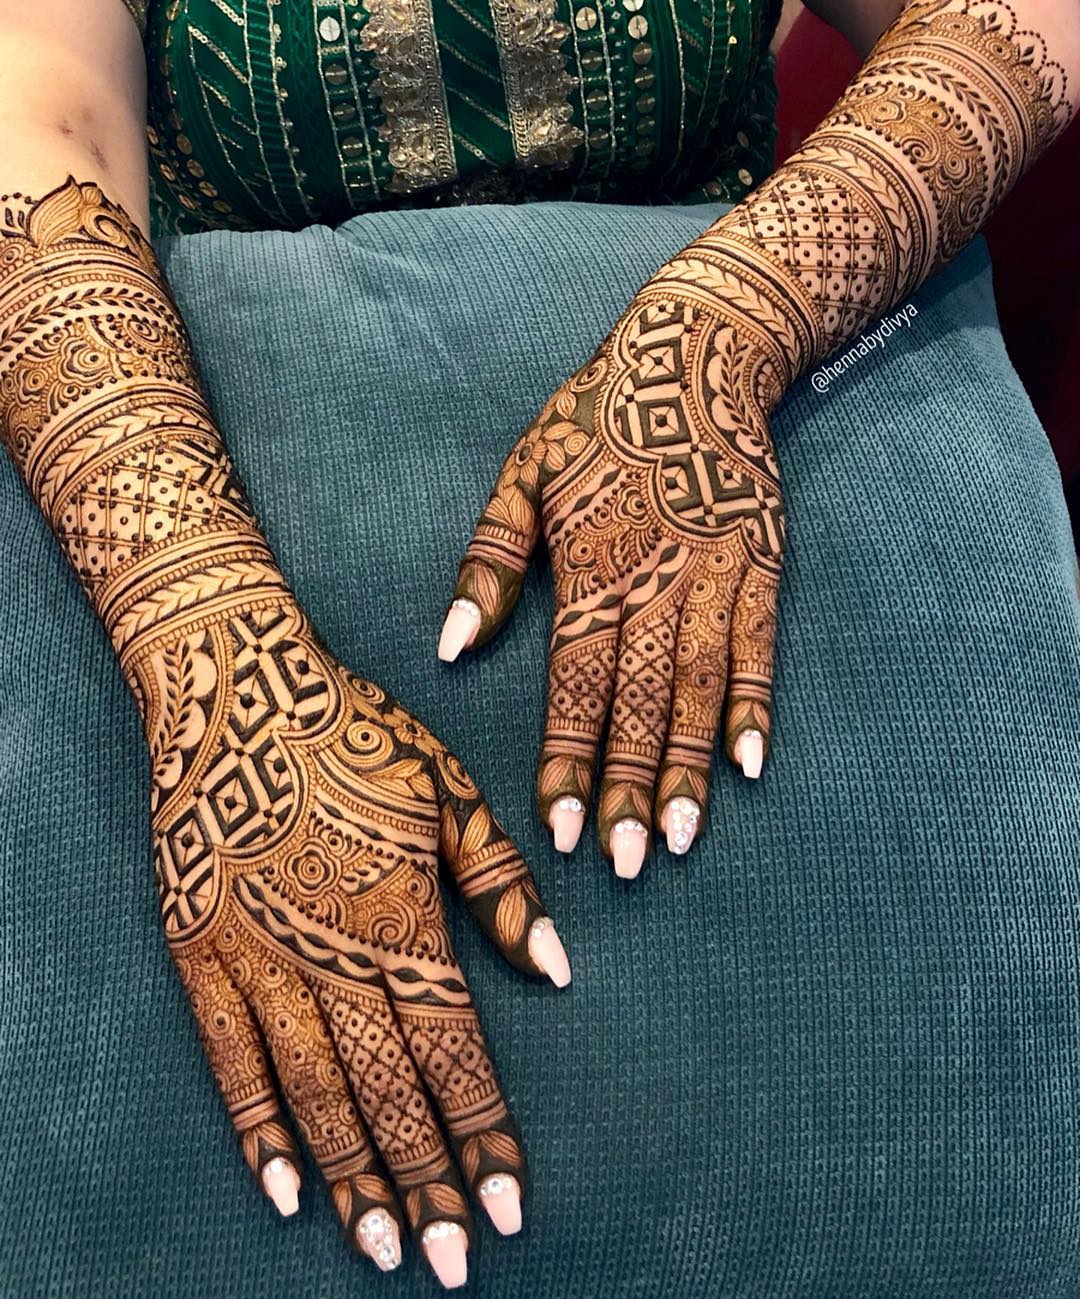 50+ Newest Bridal Mehndi Designs for Hands & Legs to Flaunt on ...